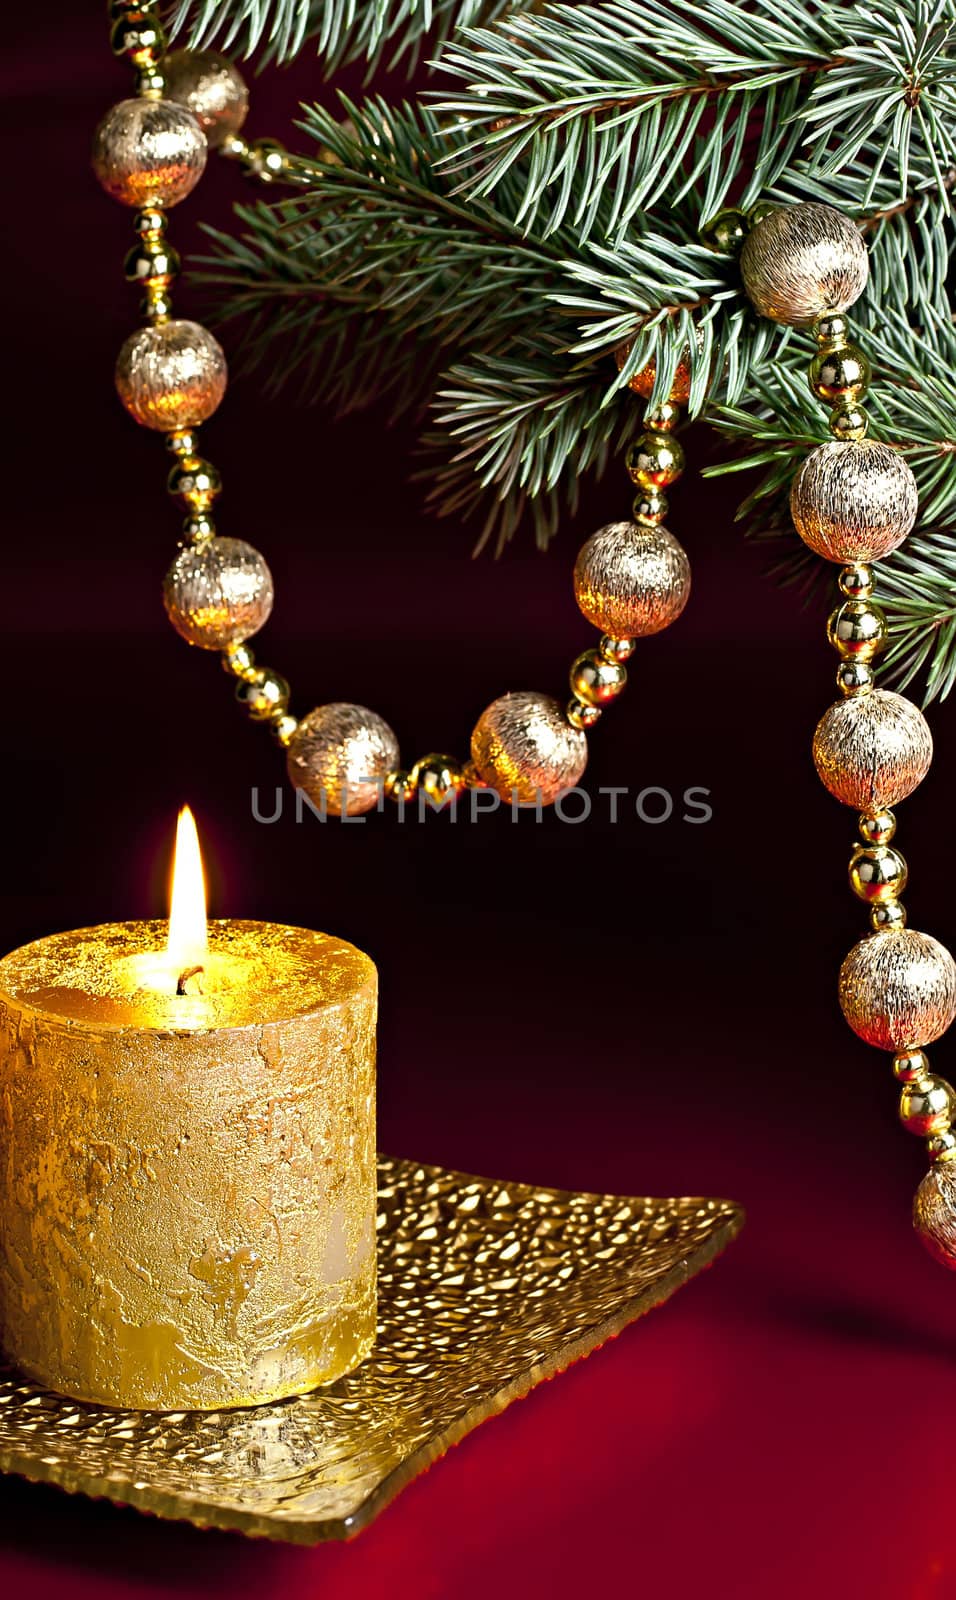 On a red background, a burning candle, fir branch and a ball chain.
